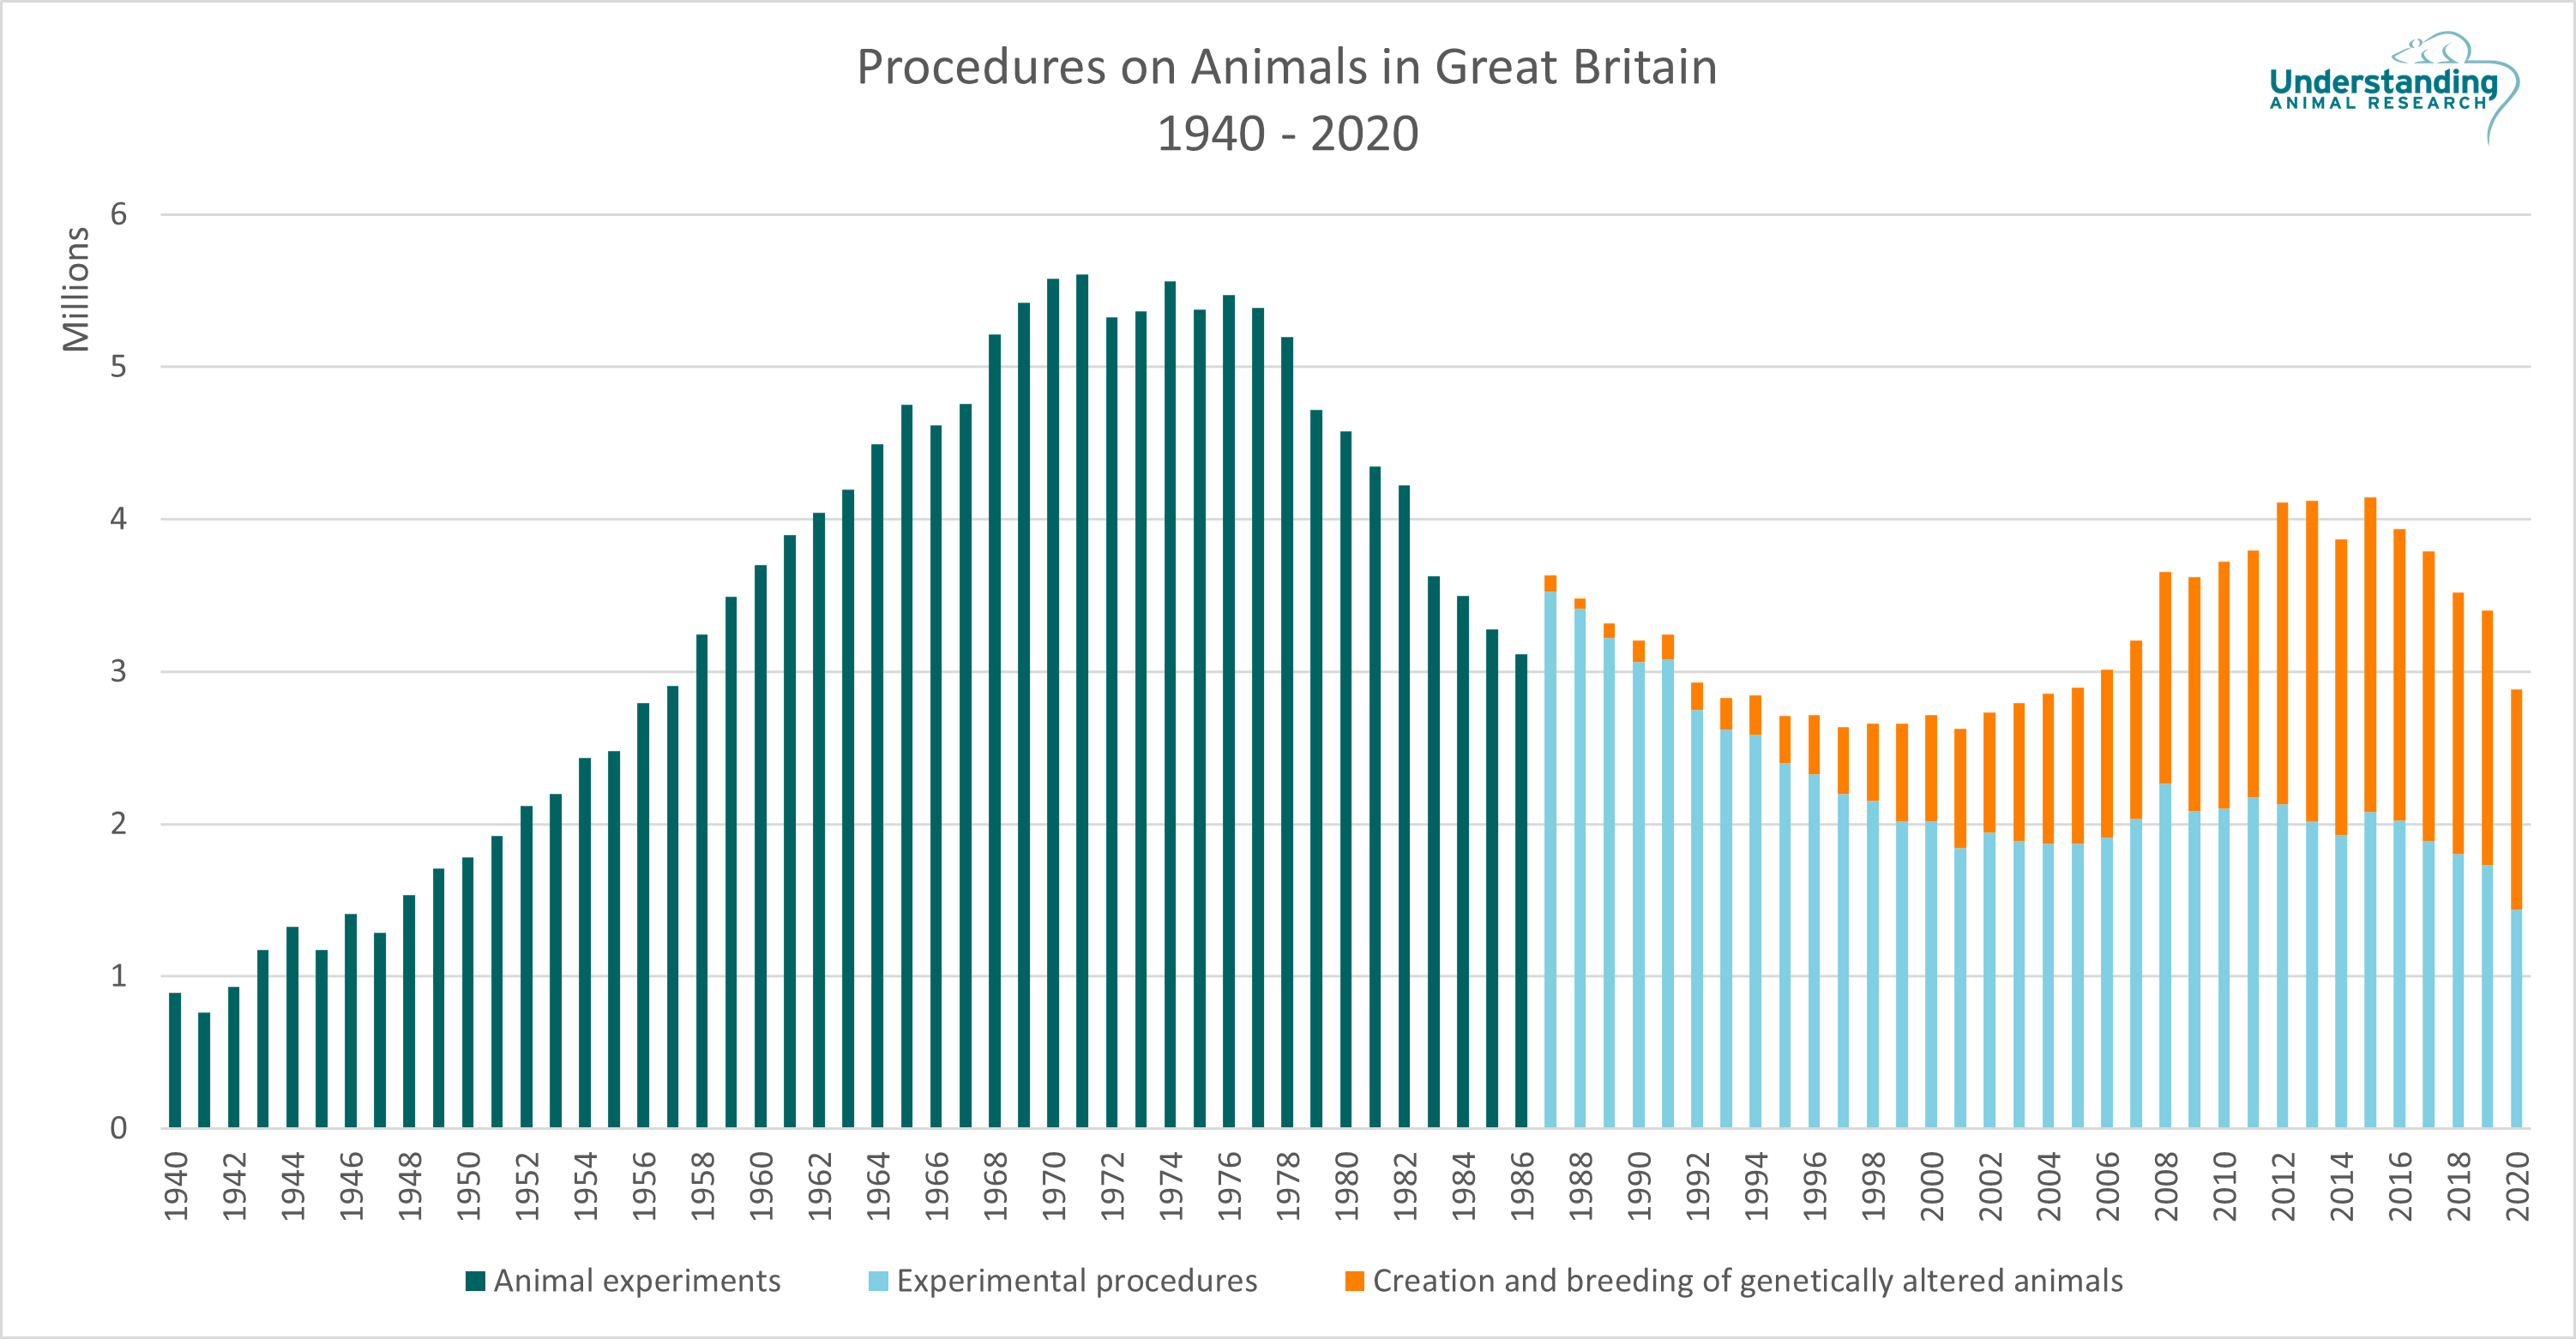 Procedures_on_Animals_in_Great_Britain_1940-2020_graph.png